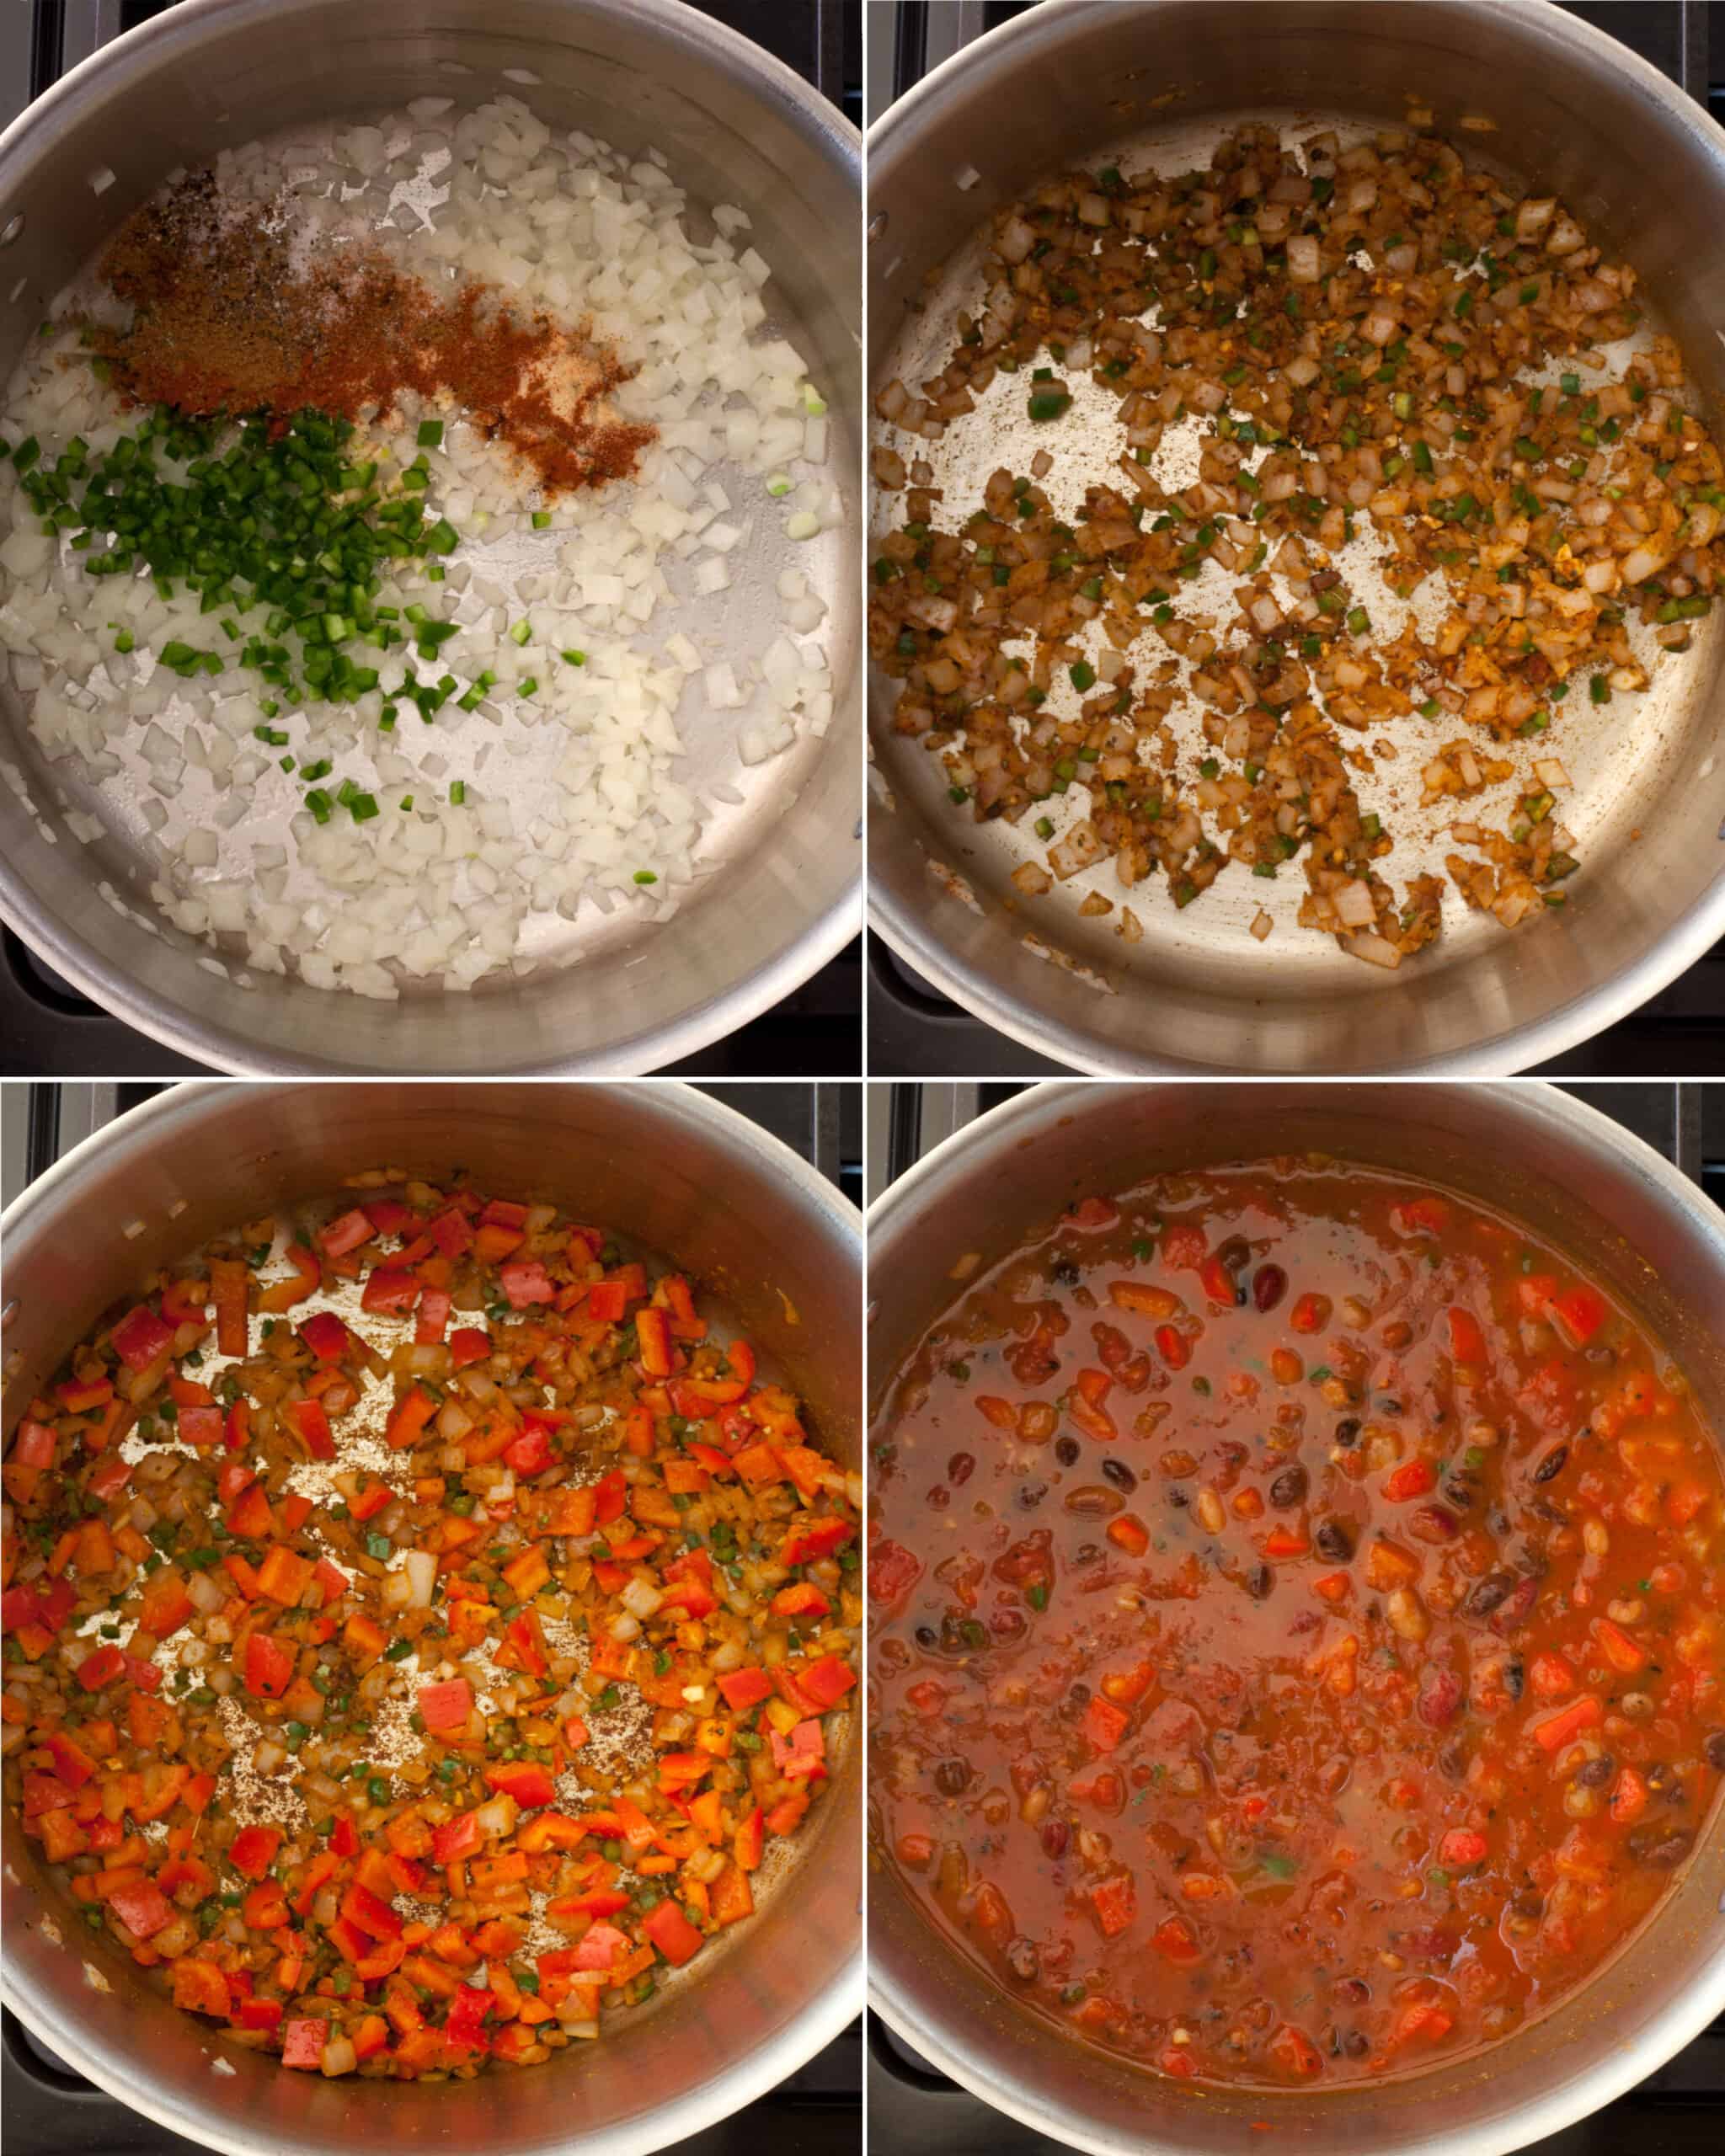 Steps showing how to make chili from sauteing the onions to  simmering the tomatoes and beans